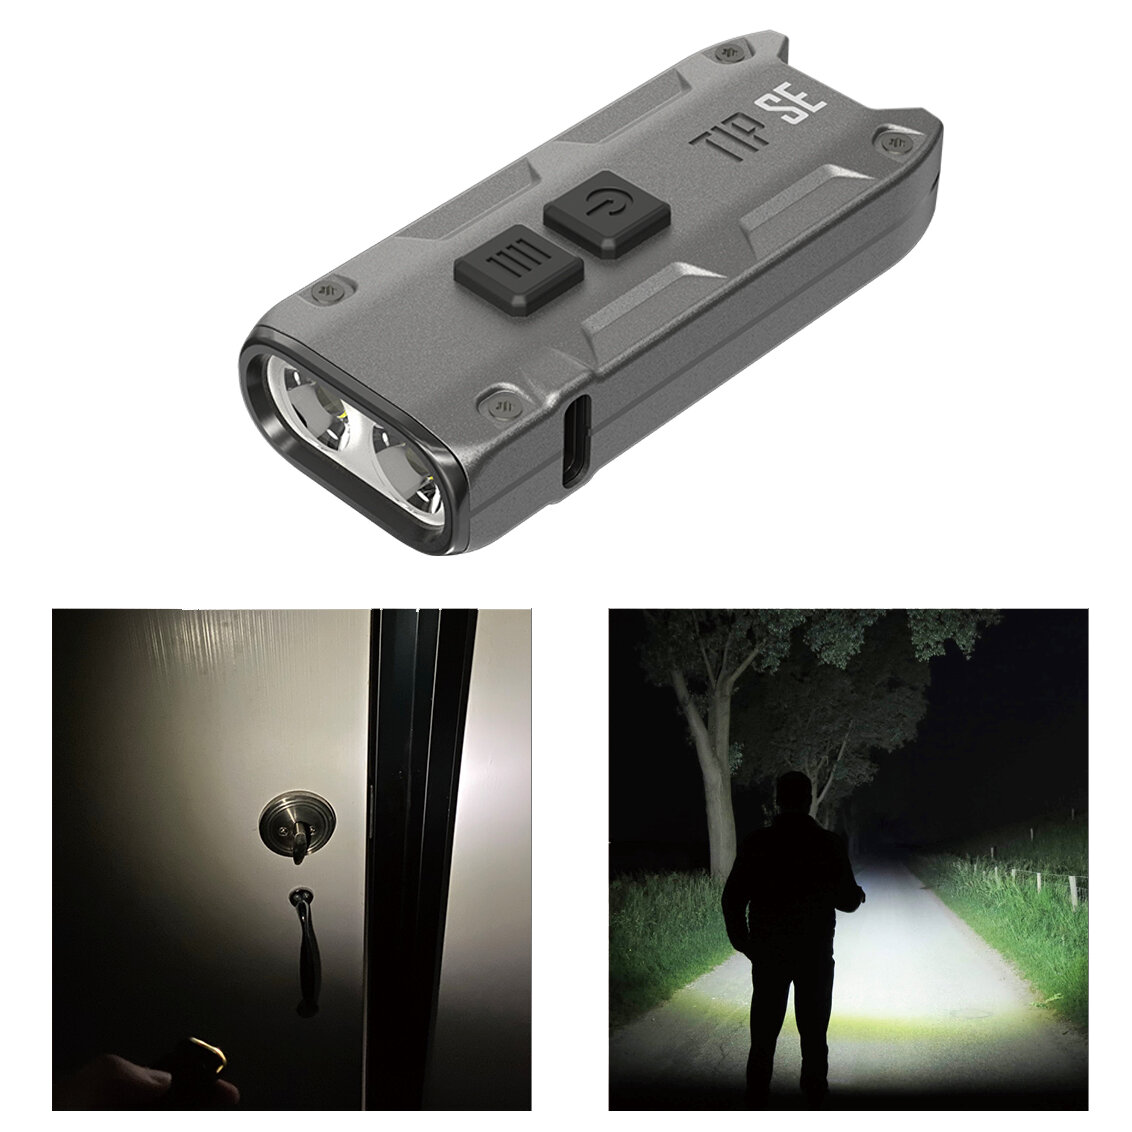 NITECORE TIP SE 700LM P8 Dual Light LED Keychain Flashlight Type-C Rechargeable QC Every Day Carry M